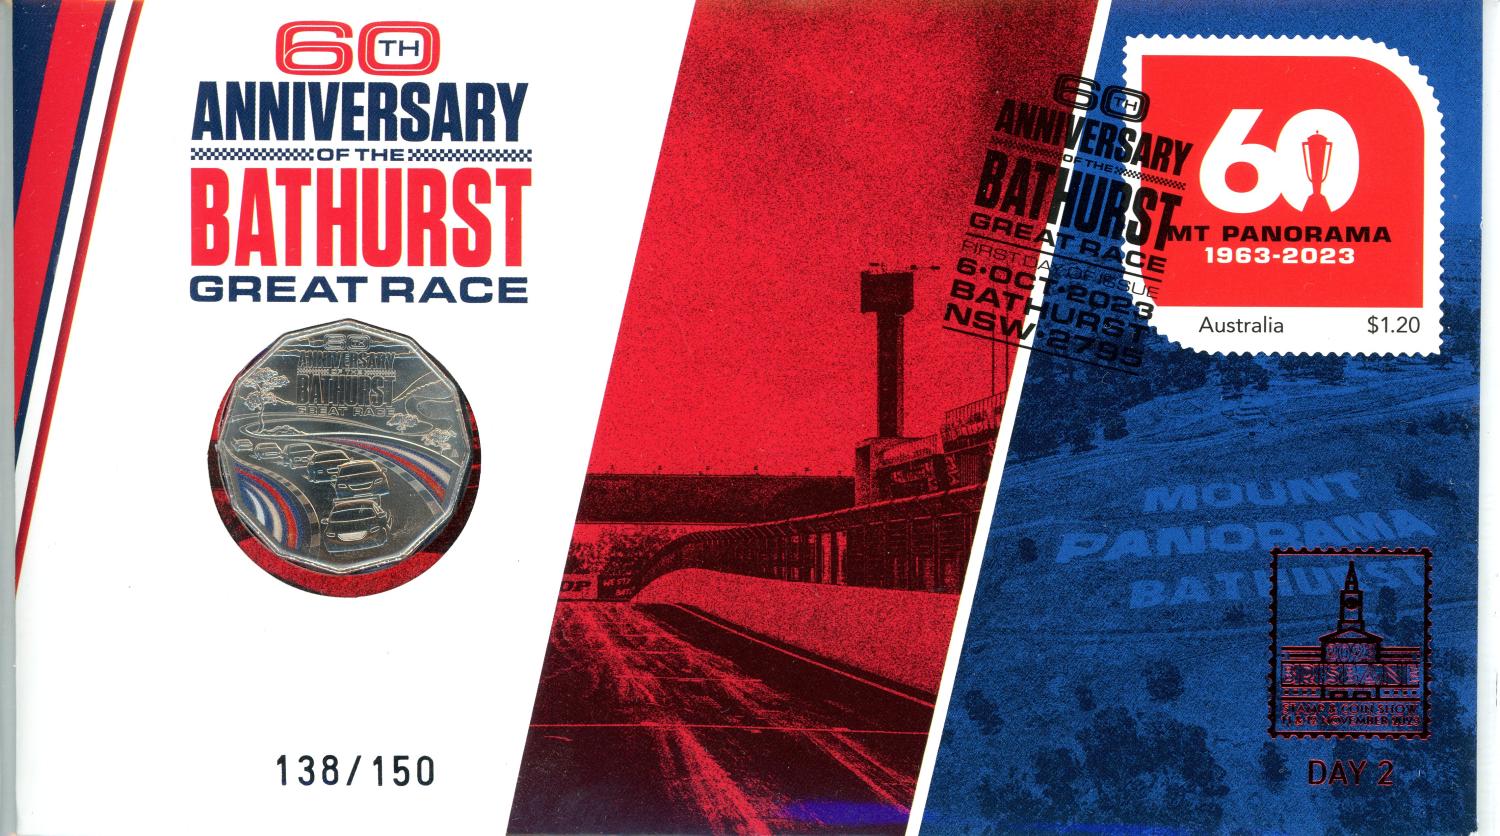 Thumbnail for 2023 Issue 27 - 60th Anniversary of the Bathurst Great Race PNC - DAY 2 Brisbane Coin Show Foil Overprint